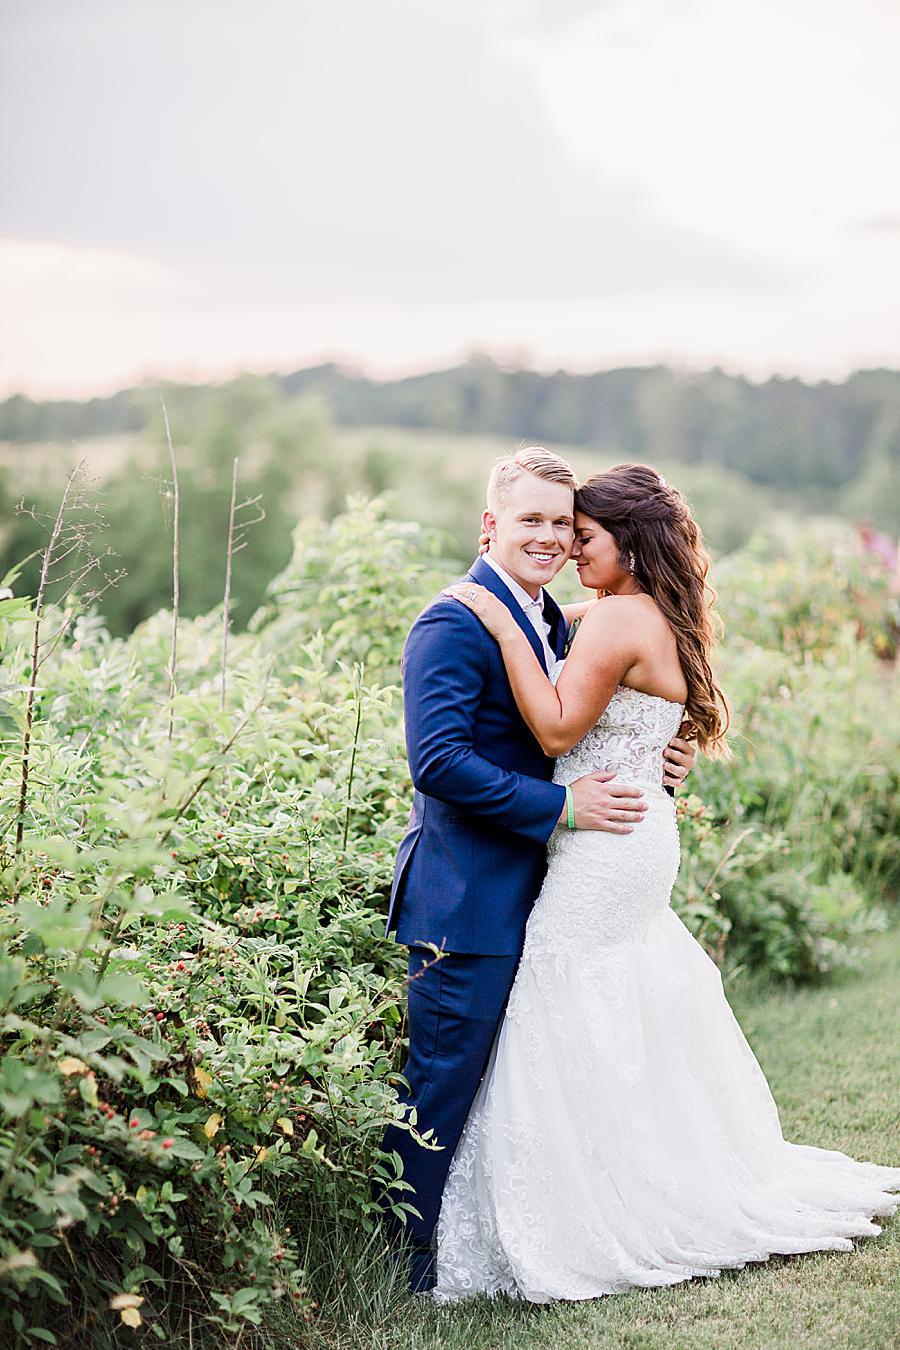 Golden hour pictures at this WindRiver Wedding Day by Knoxville Wedding Photographer, Amanda May Photos.